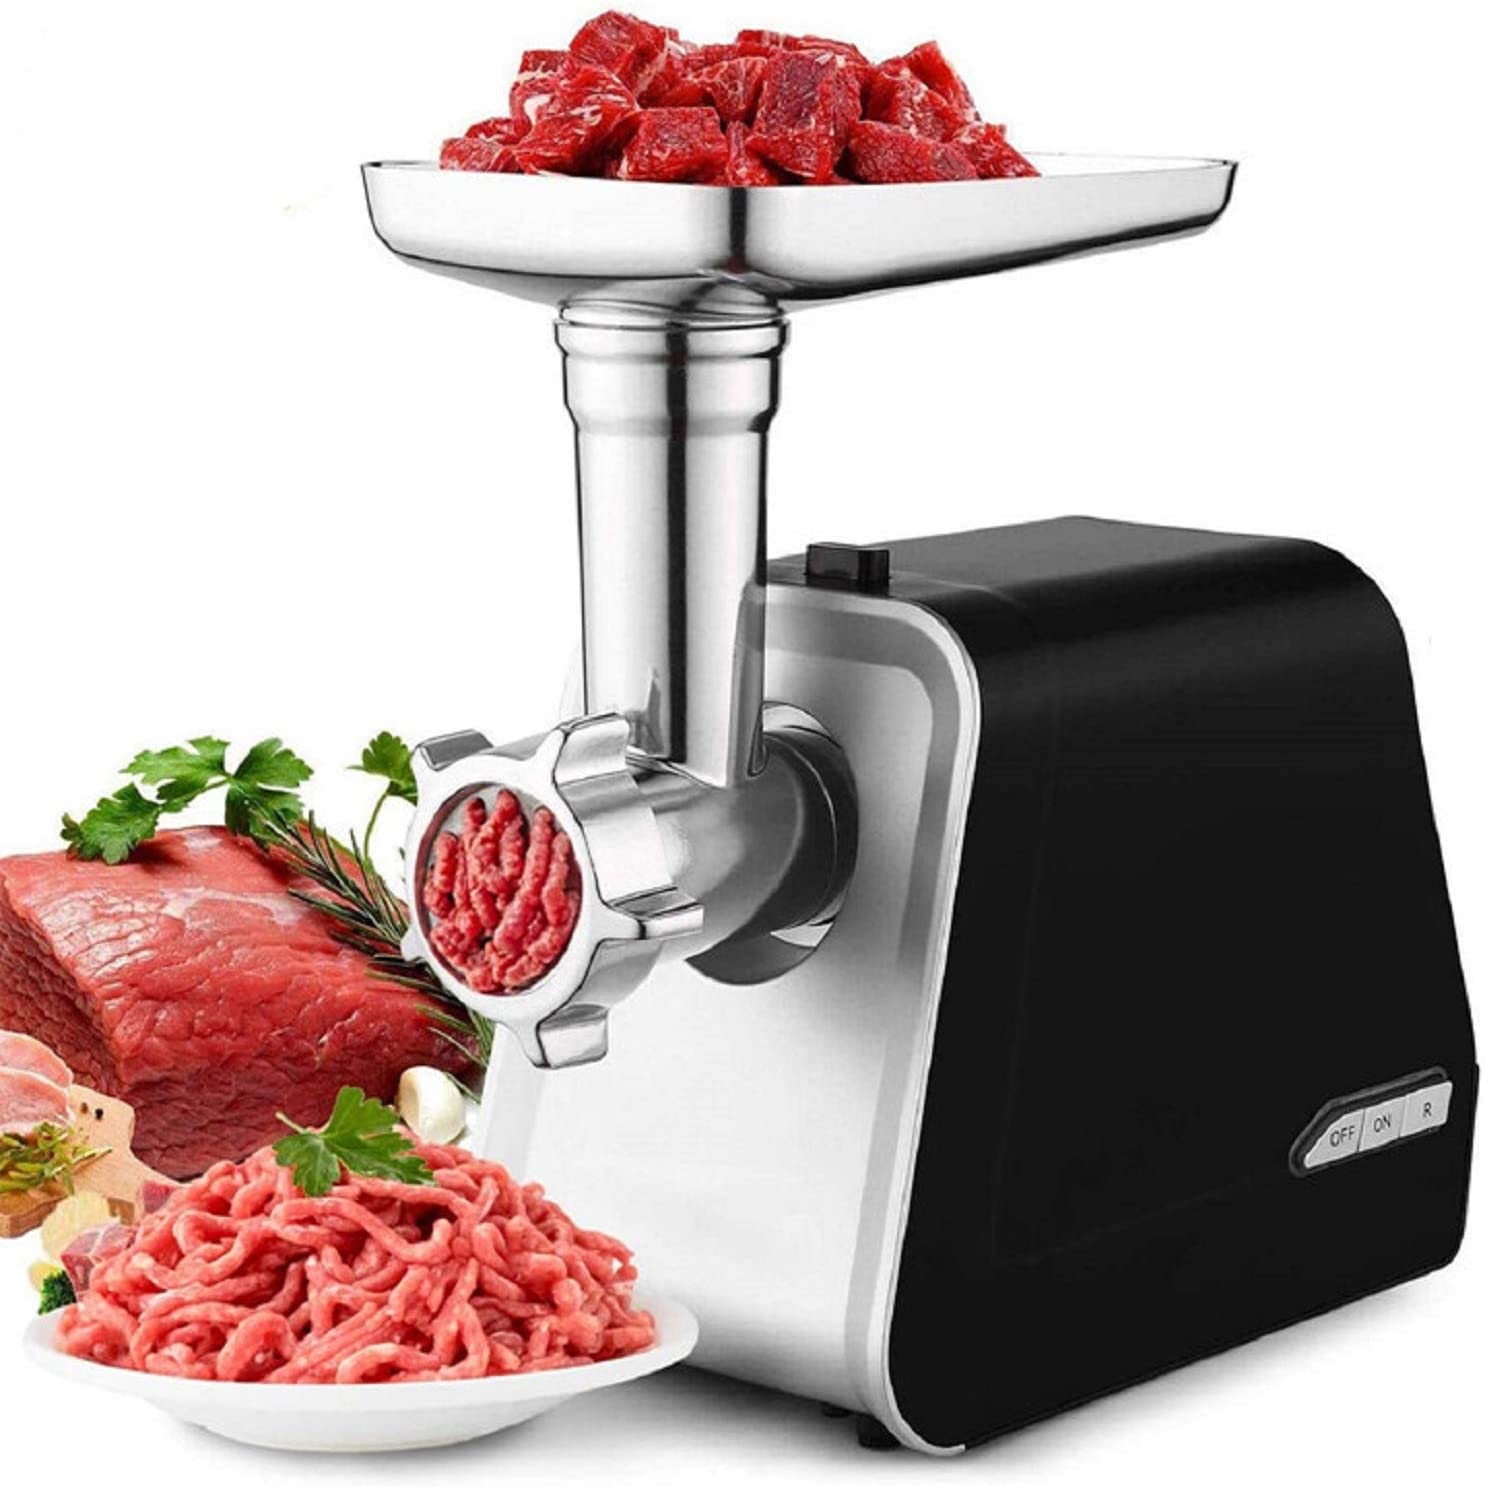 Nictemaw Electric Meat Mincer with 3 Stainless Steel Grinding Plates, Cubbe, Sausage Filling Pipes, Meat Mincer Electric Stainless Steel 2000 W Max, Black